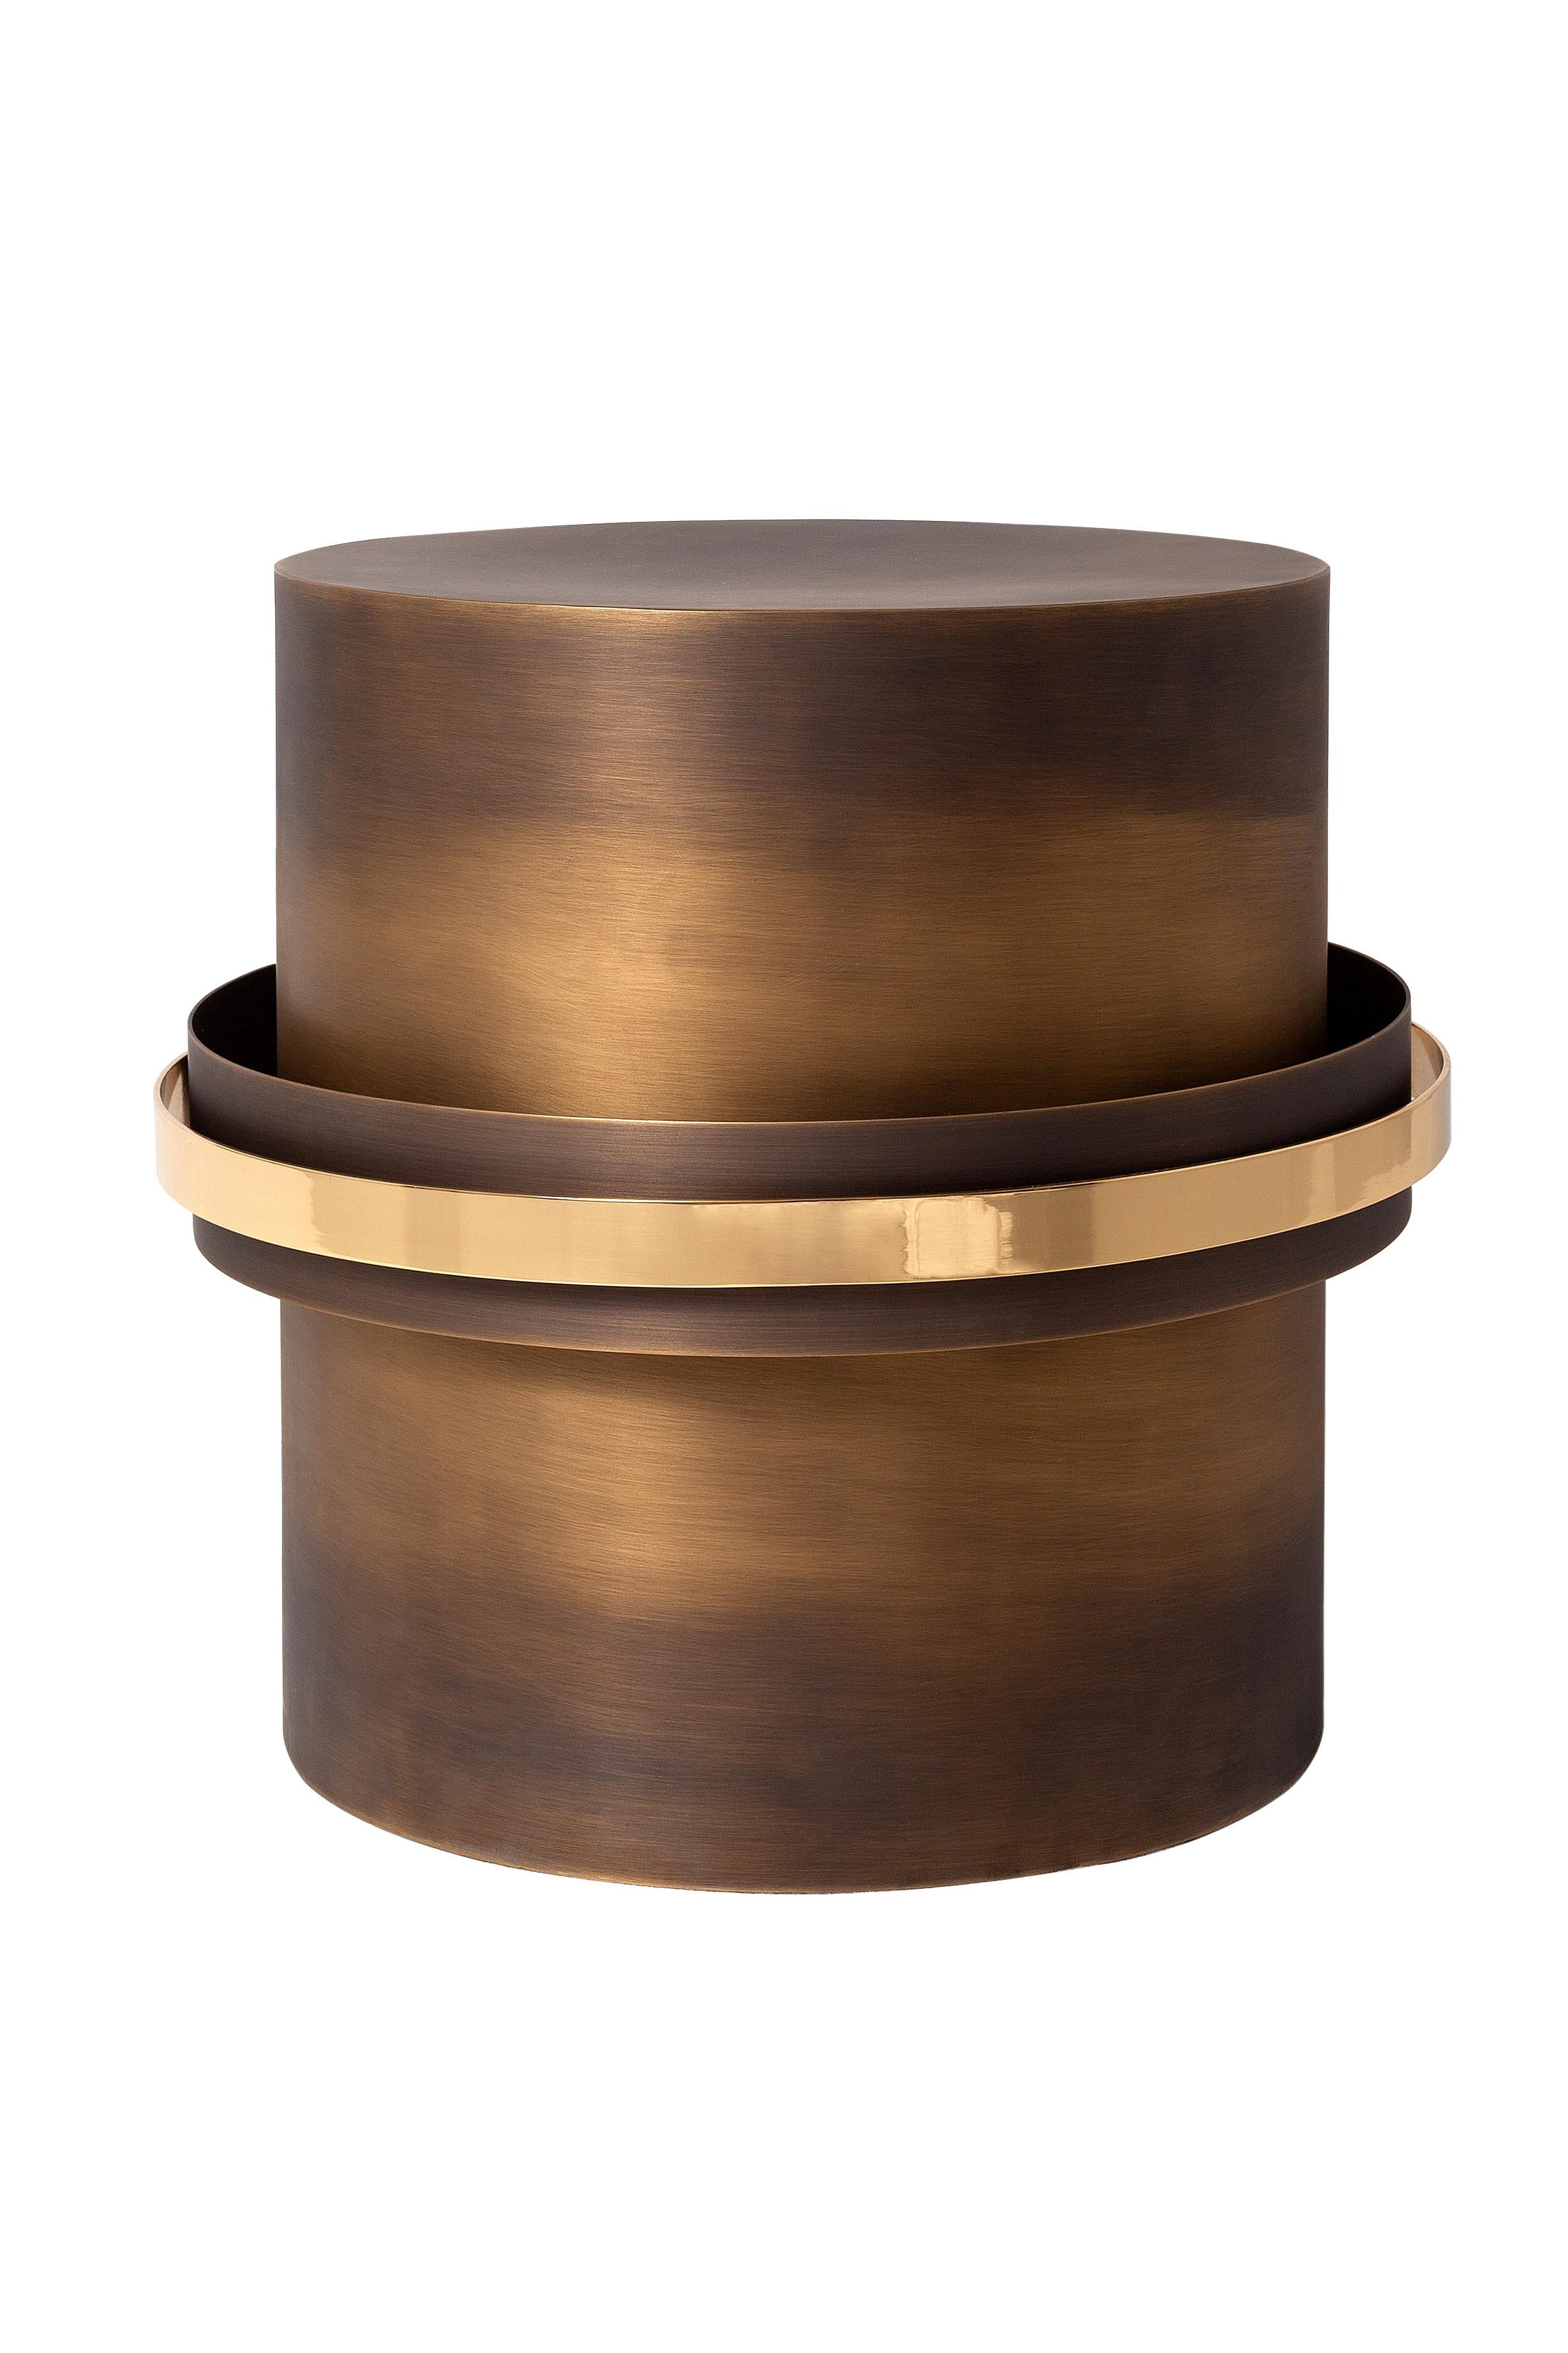 Orbit Accent Table, Dark Bronze and Polished Brass, Handcrafted by Duistt

Orbit accent table is made in brass, the structure is involved by two rings which provides a graceful feeling of movement and stillness at the same time, allowing you to